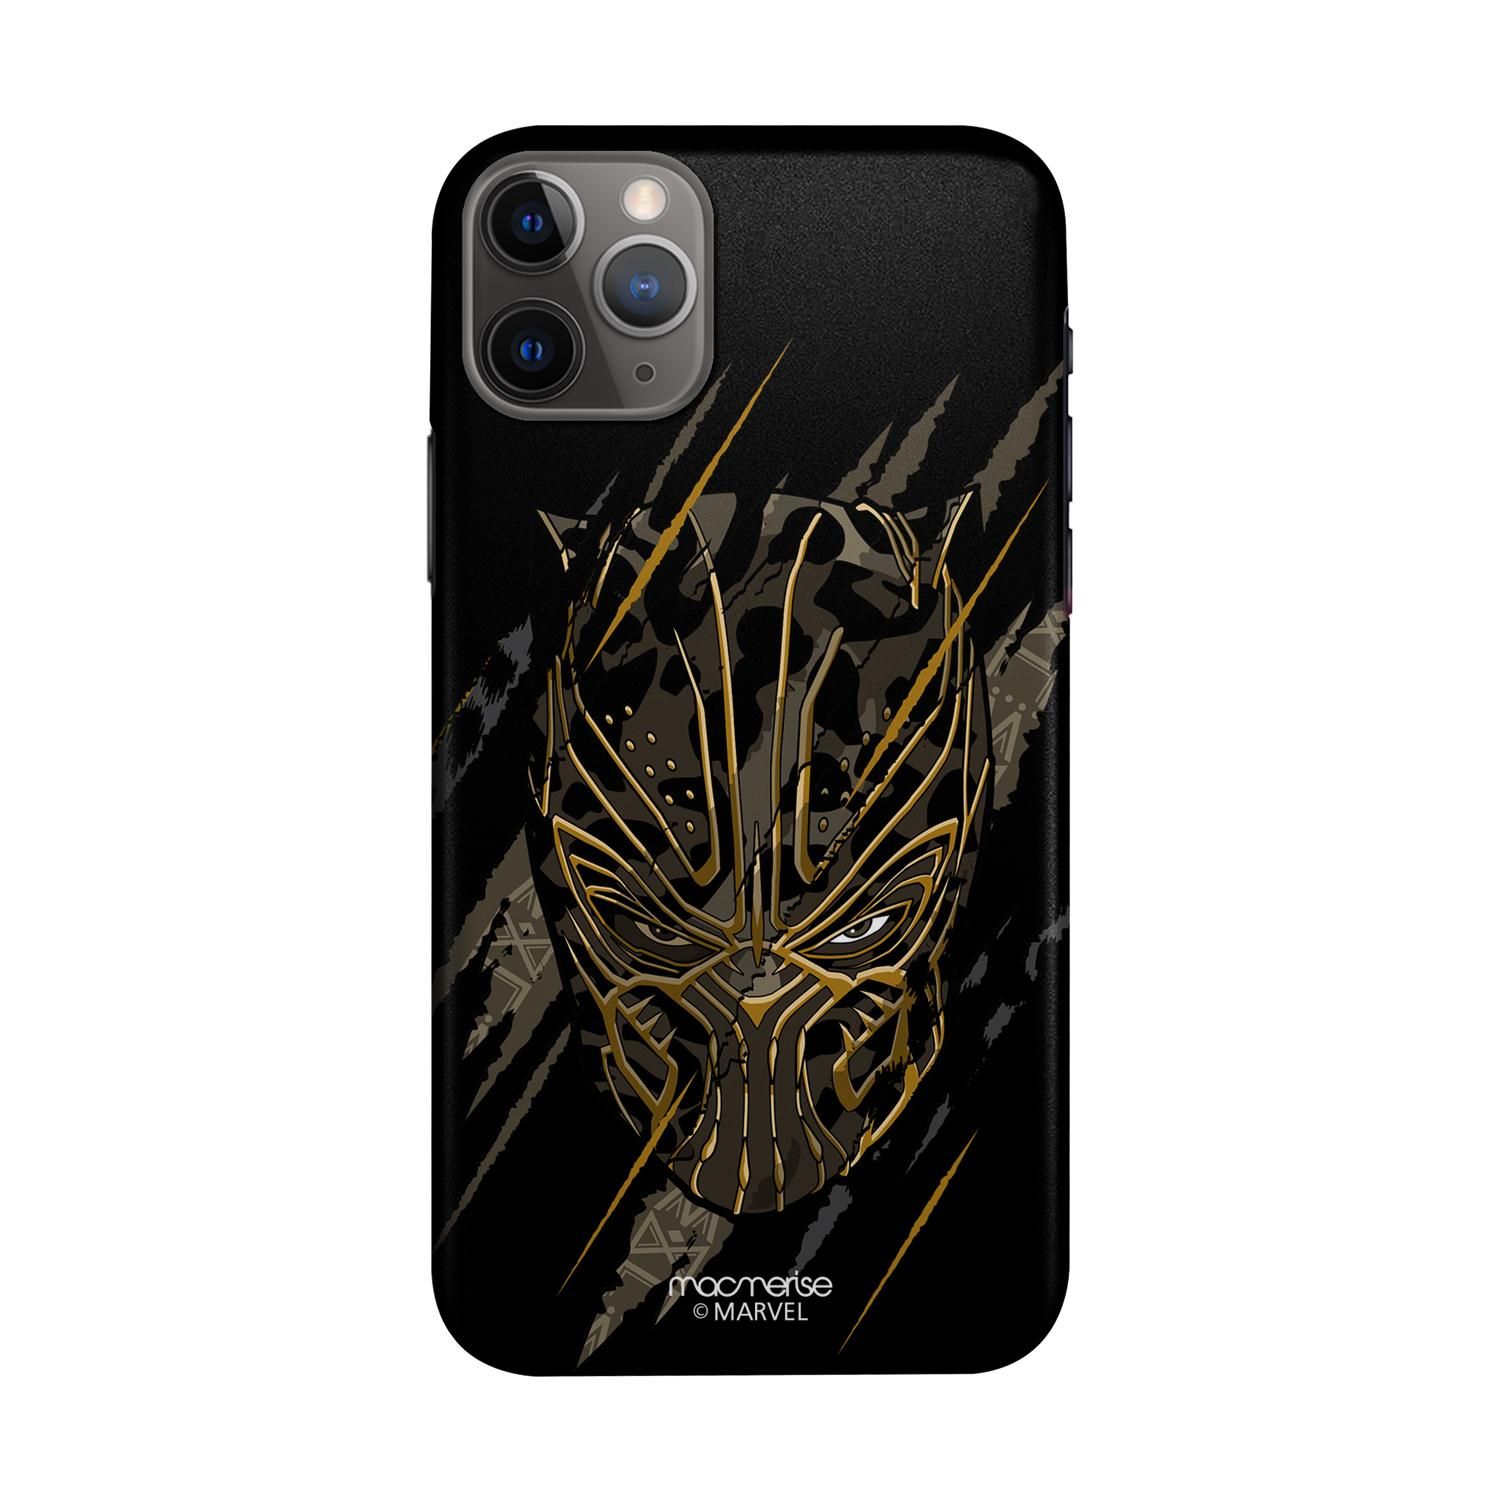 Buy Headstrong Contender - Sleek Phone Case for iPhone 11 Pro Max Online